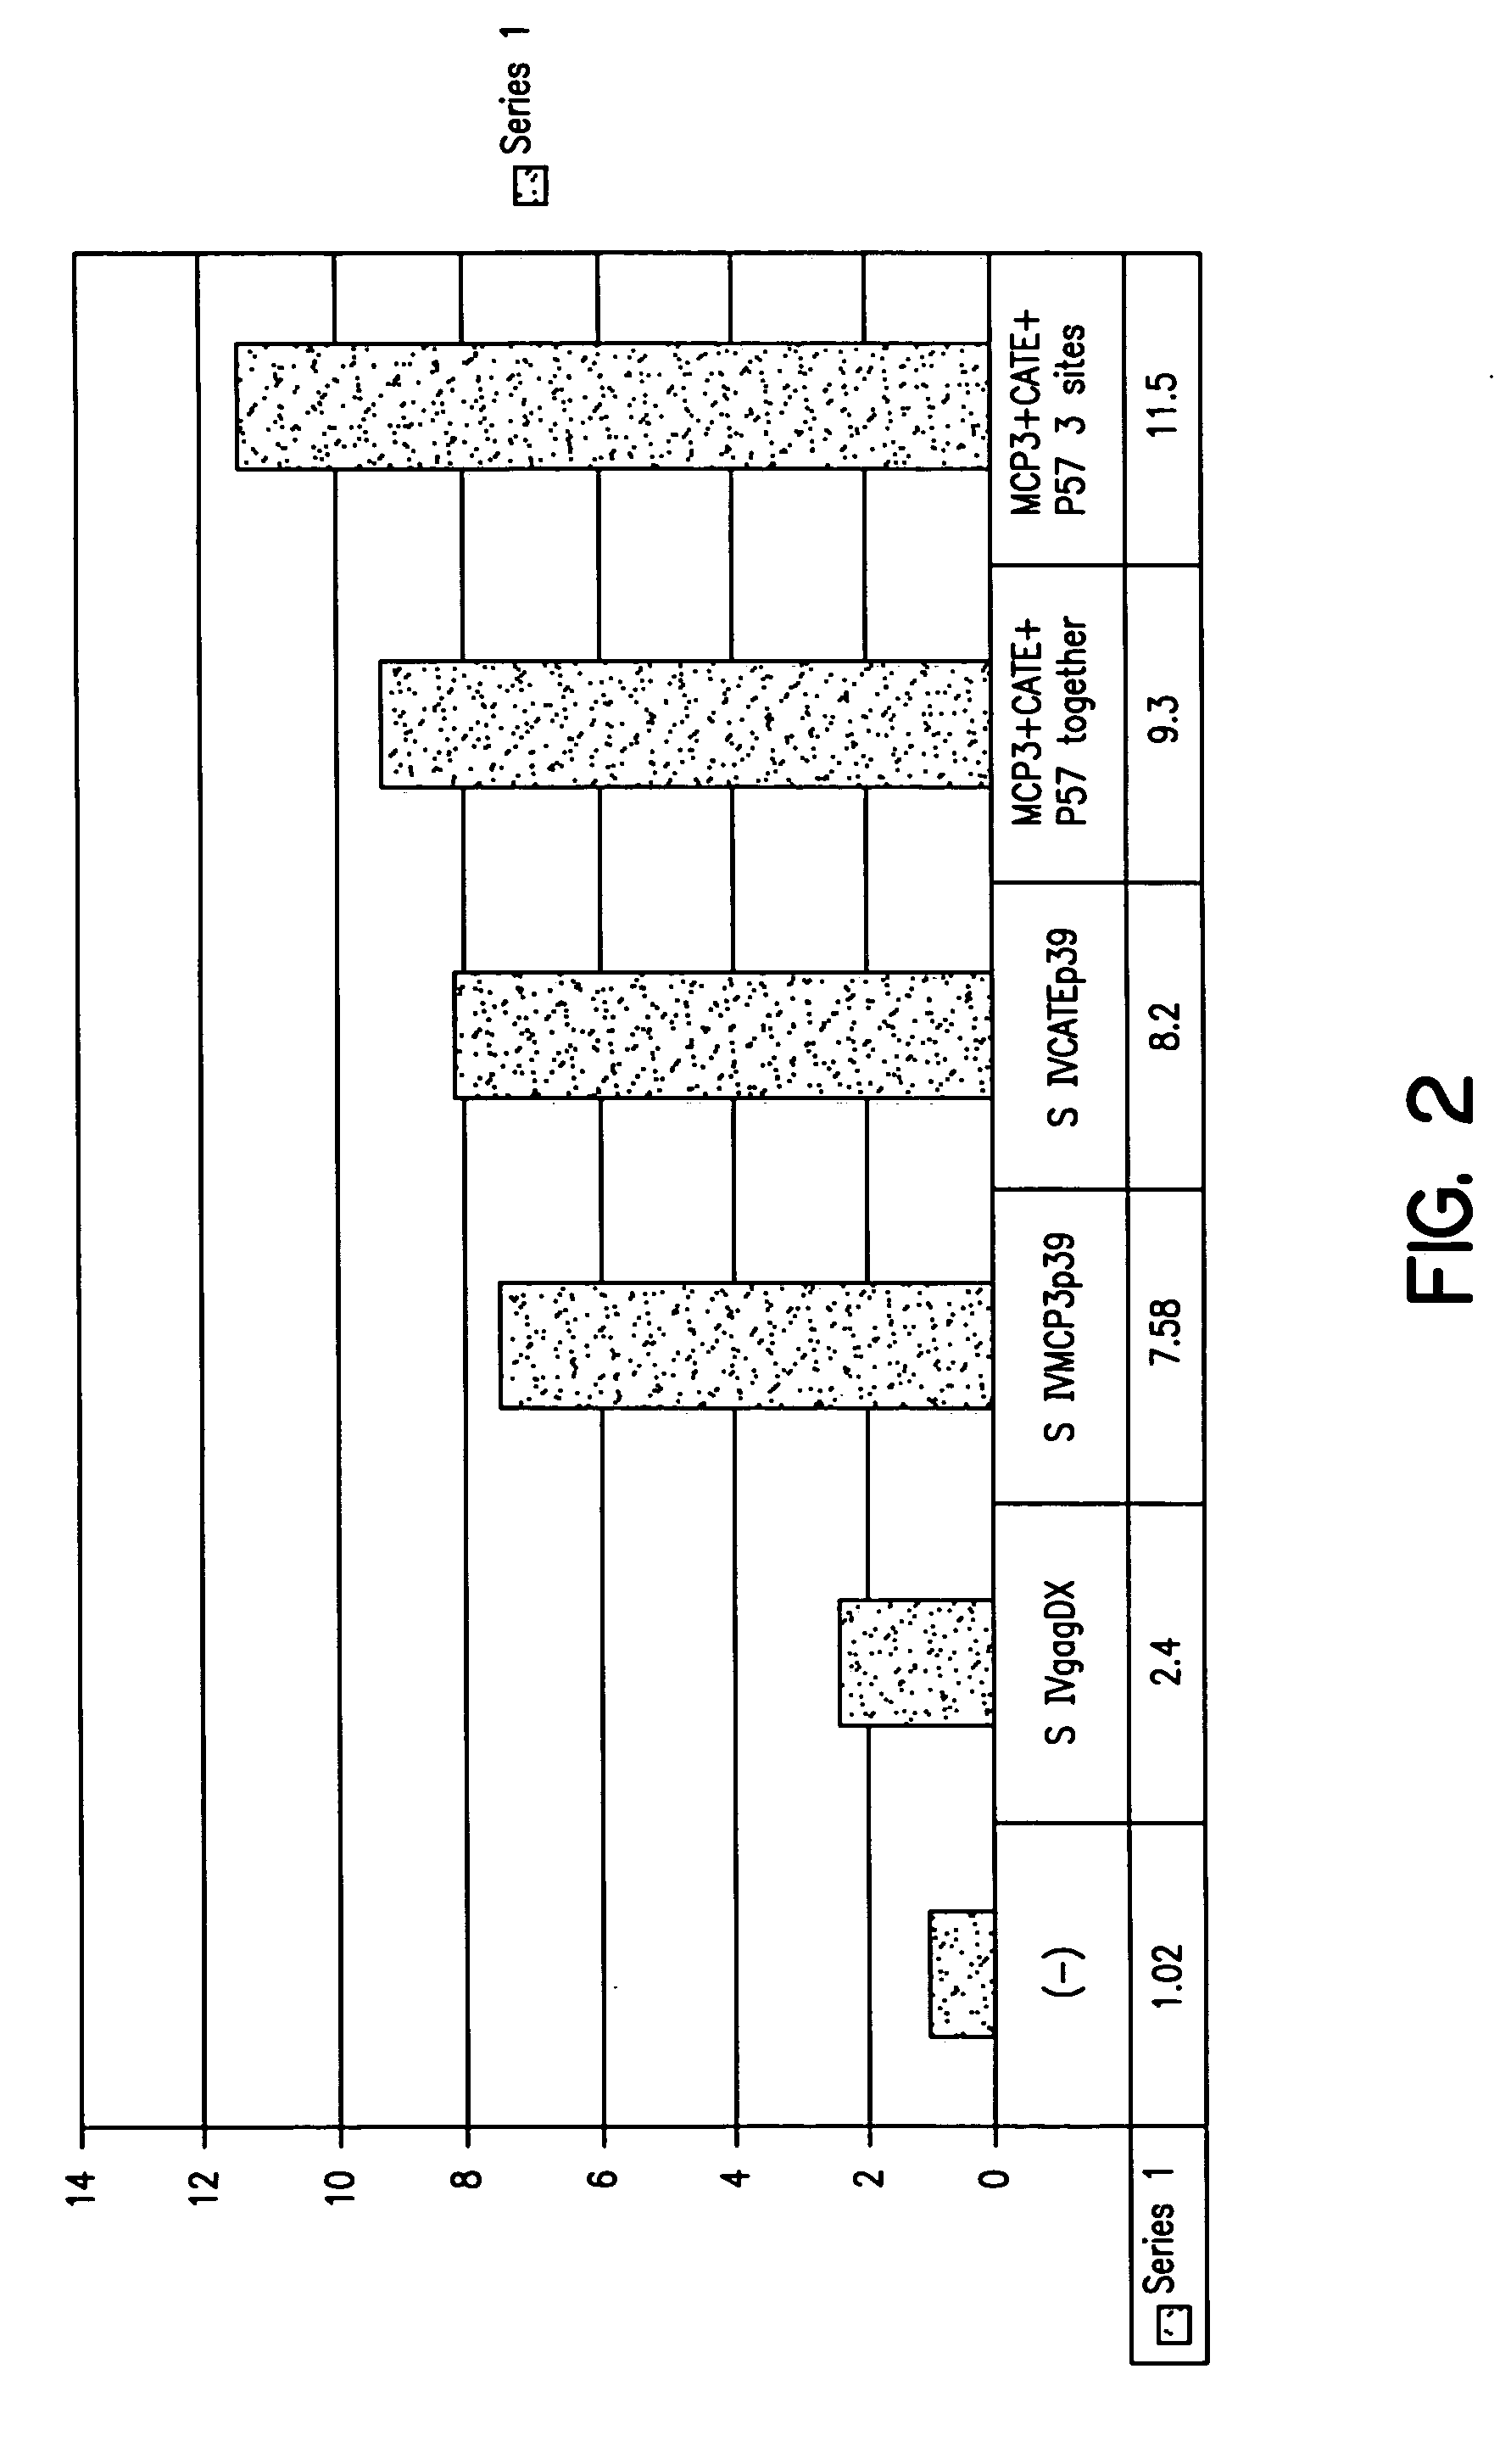 Expression vectors able to elicit improved immune response and methods of using same